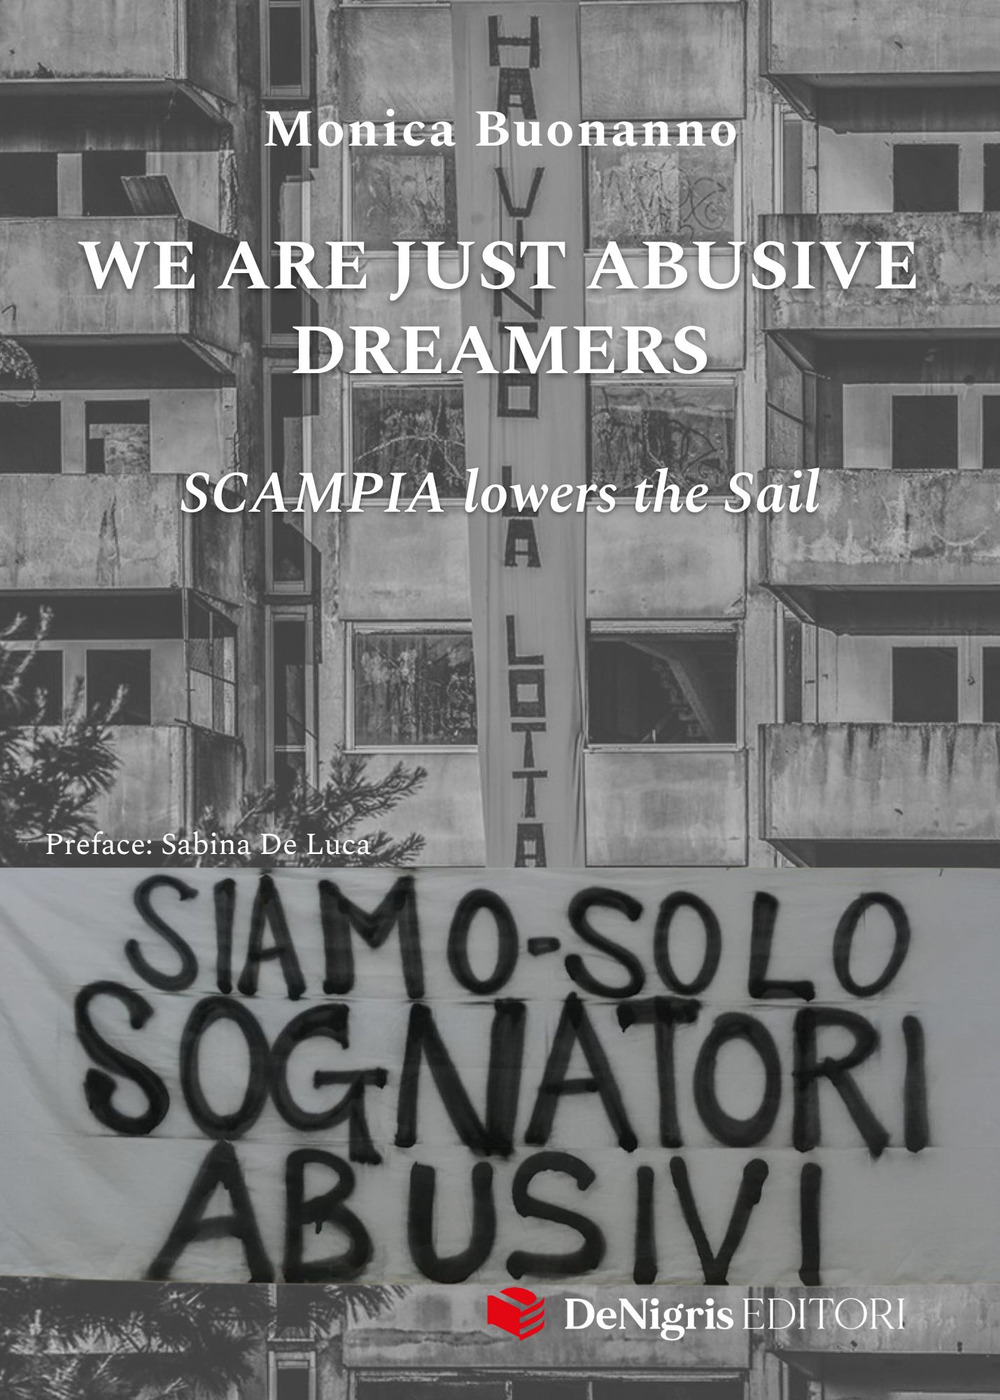 We are just abusive dreamers. Scampia lowers the sail